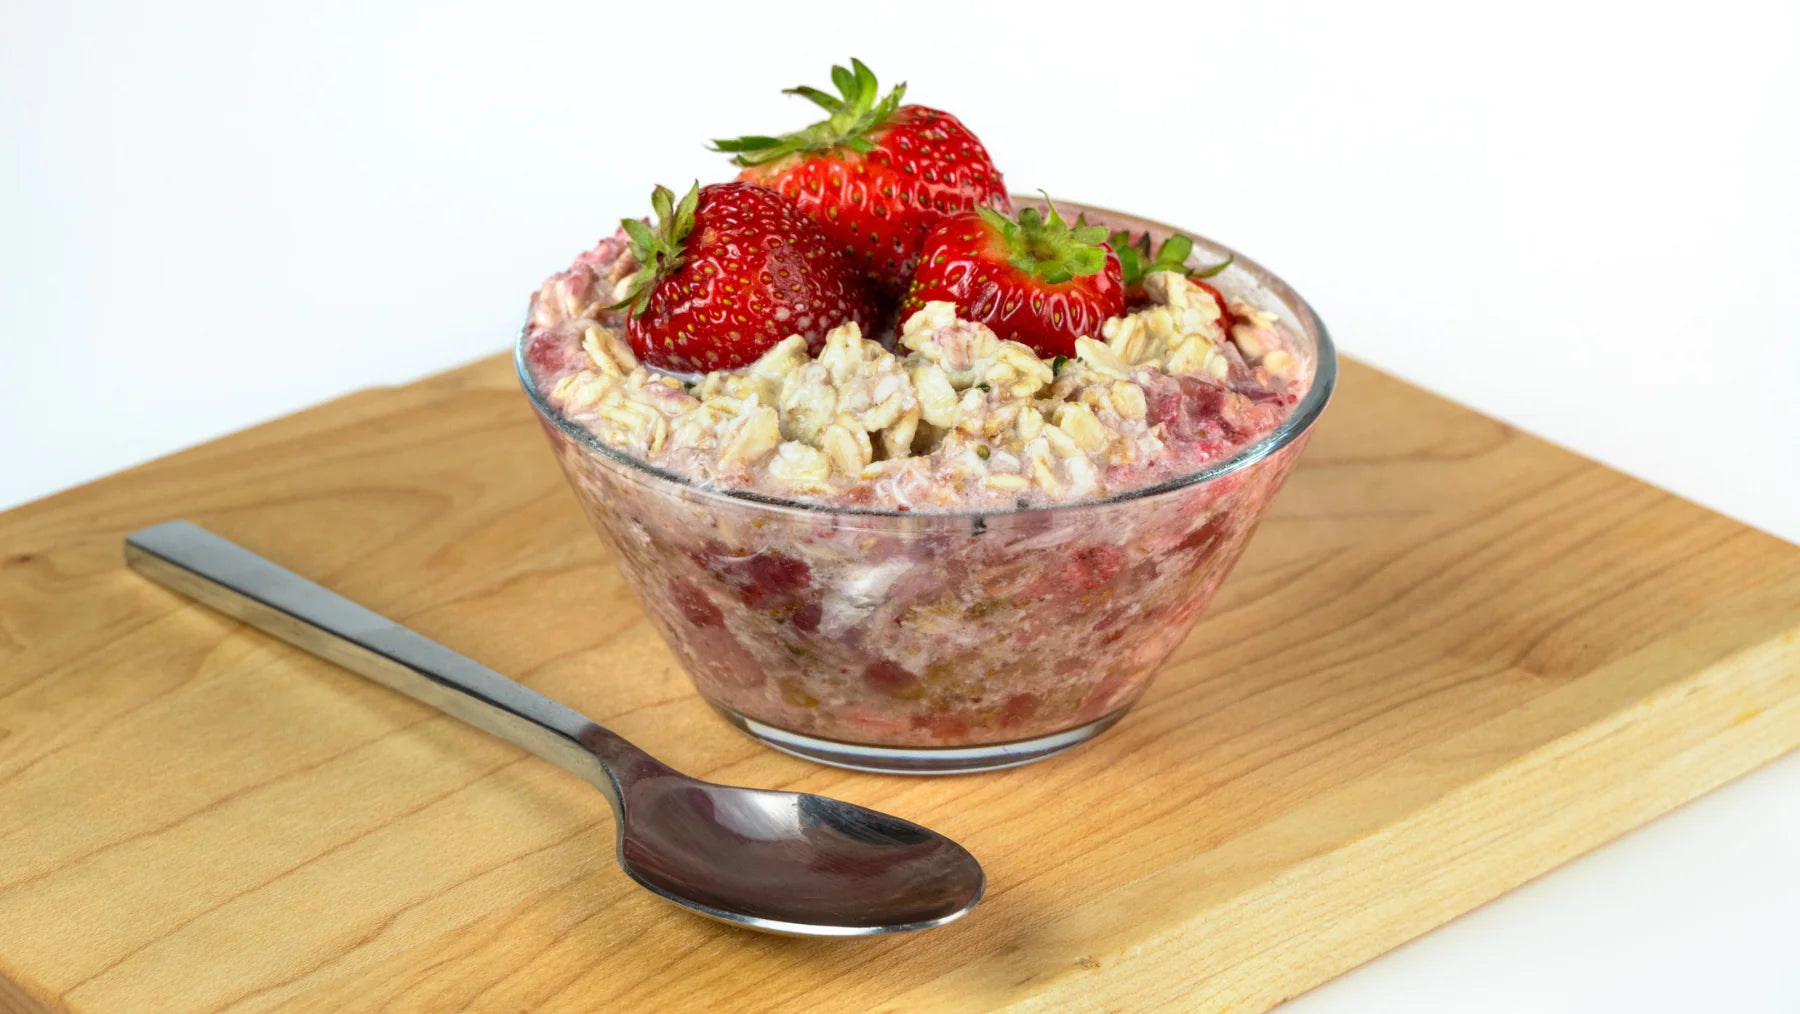 strawberry overnight oats in a glass bowl on a wood cutting board with a spoon laying next to the bowl